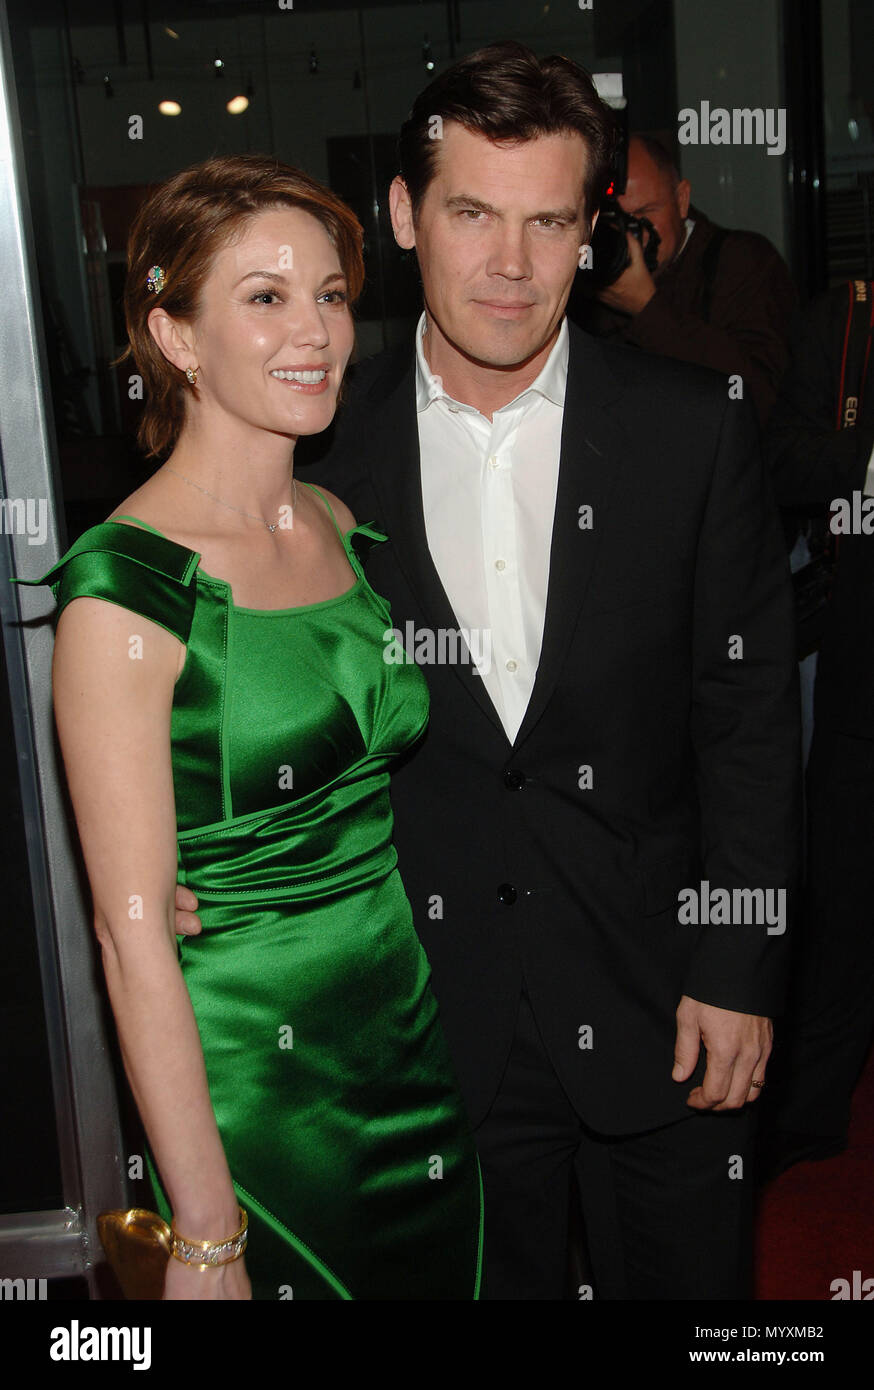 Diane LANE  and husband Josh Brolin arriving at the UNTRACEABLE Premiere at the Silver Screen Theatre In Los Angeles.  Three quarters eye contact LaneDiane BrolinJosh 42  Event in Hollywood Life - California, Red Carpet Event, USA, Film Industry, Celebrities, Photography, Bestof, Arts Culture and Entertainment, Celebrities fashion, Best of, Hollywood Life, Event in Hollywood Life - California, Red Carpet and backstage, Music celebrities, Topix, Couple, family ( husband and wife ) and kids- Children, brothers and sisters inquiry tsuni@Gamma-USA.com, Credit Tsuni / USA, 2006 to 2009 Stock Photo